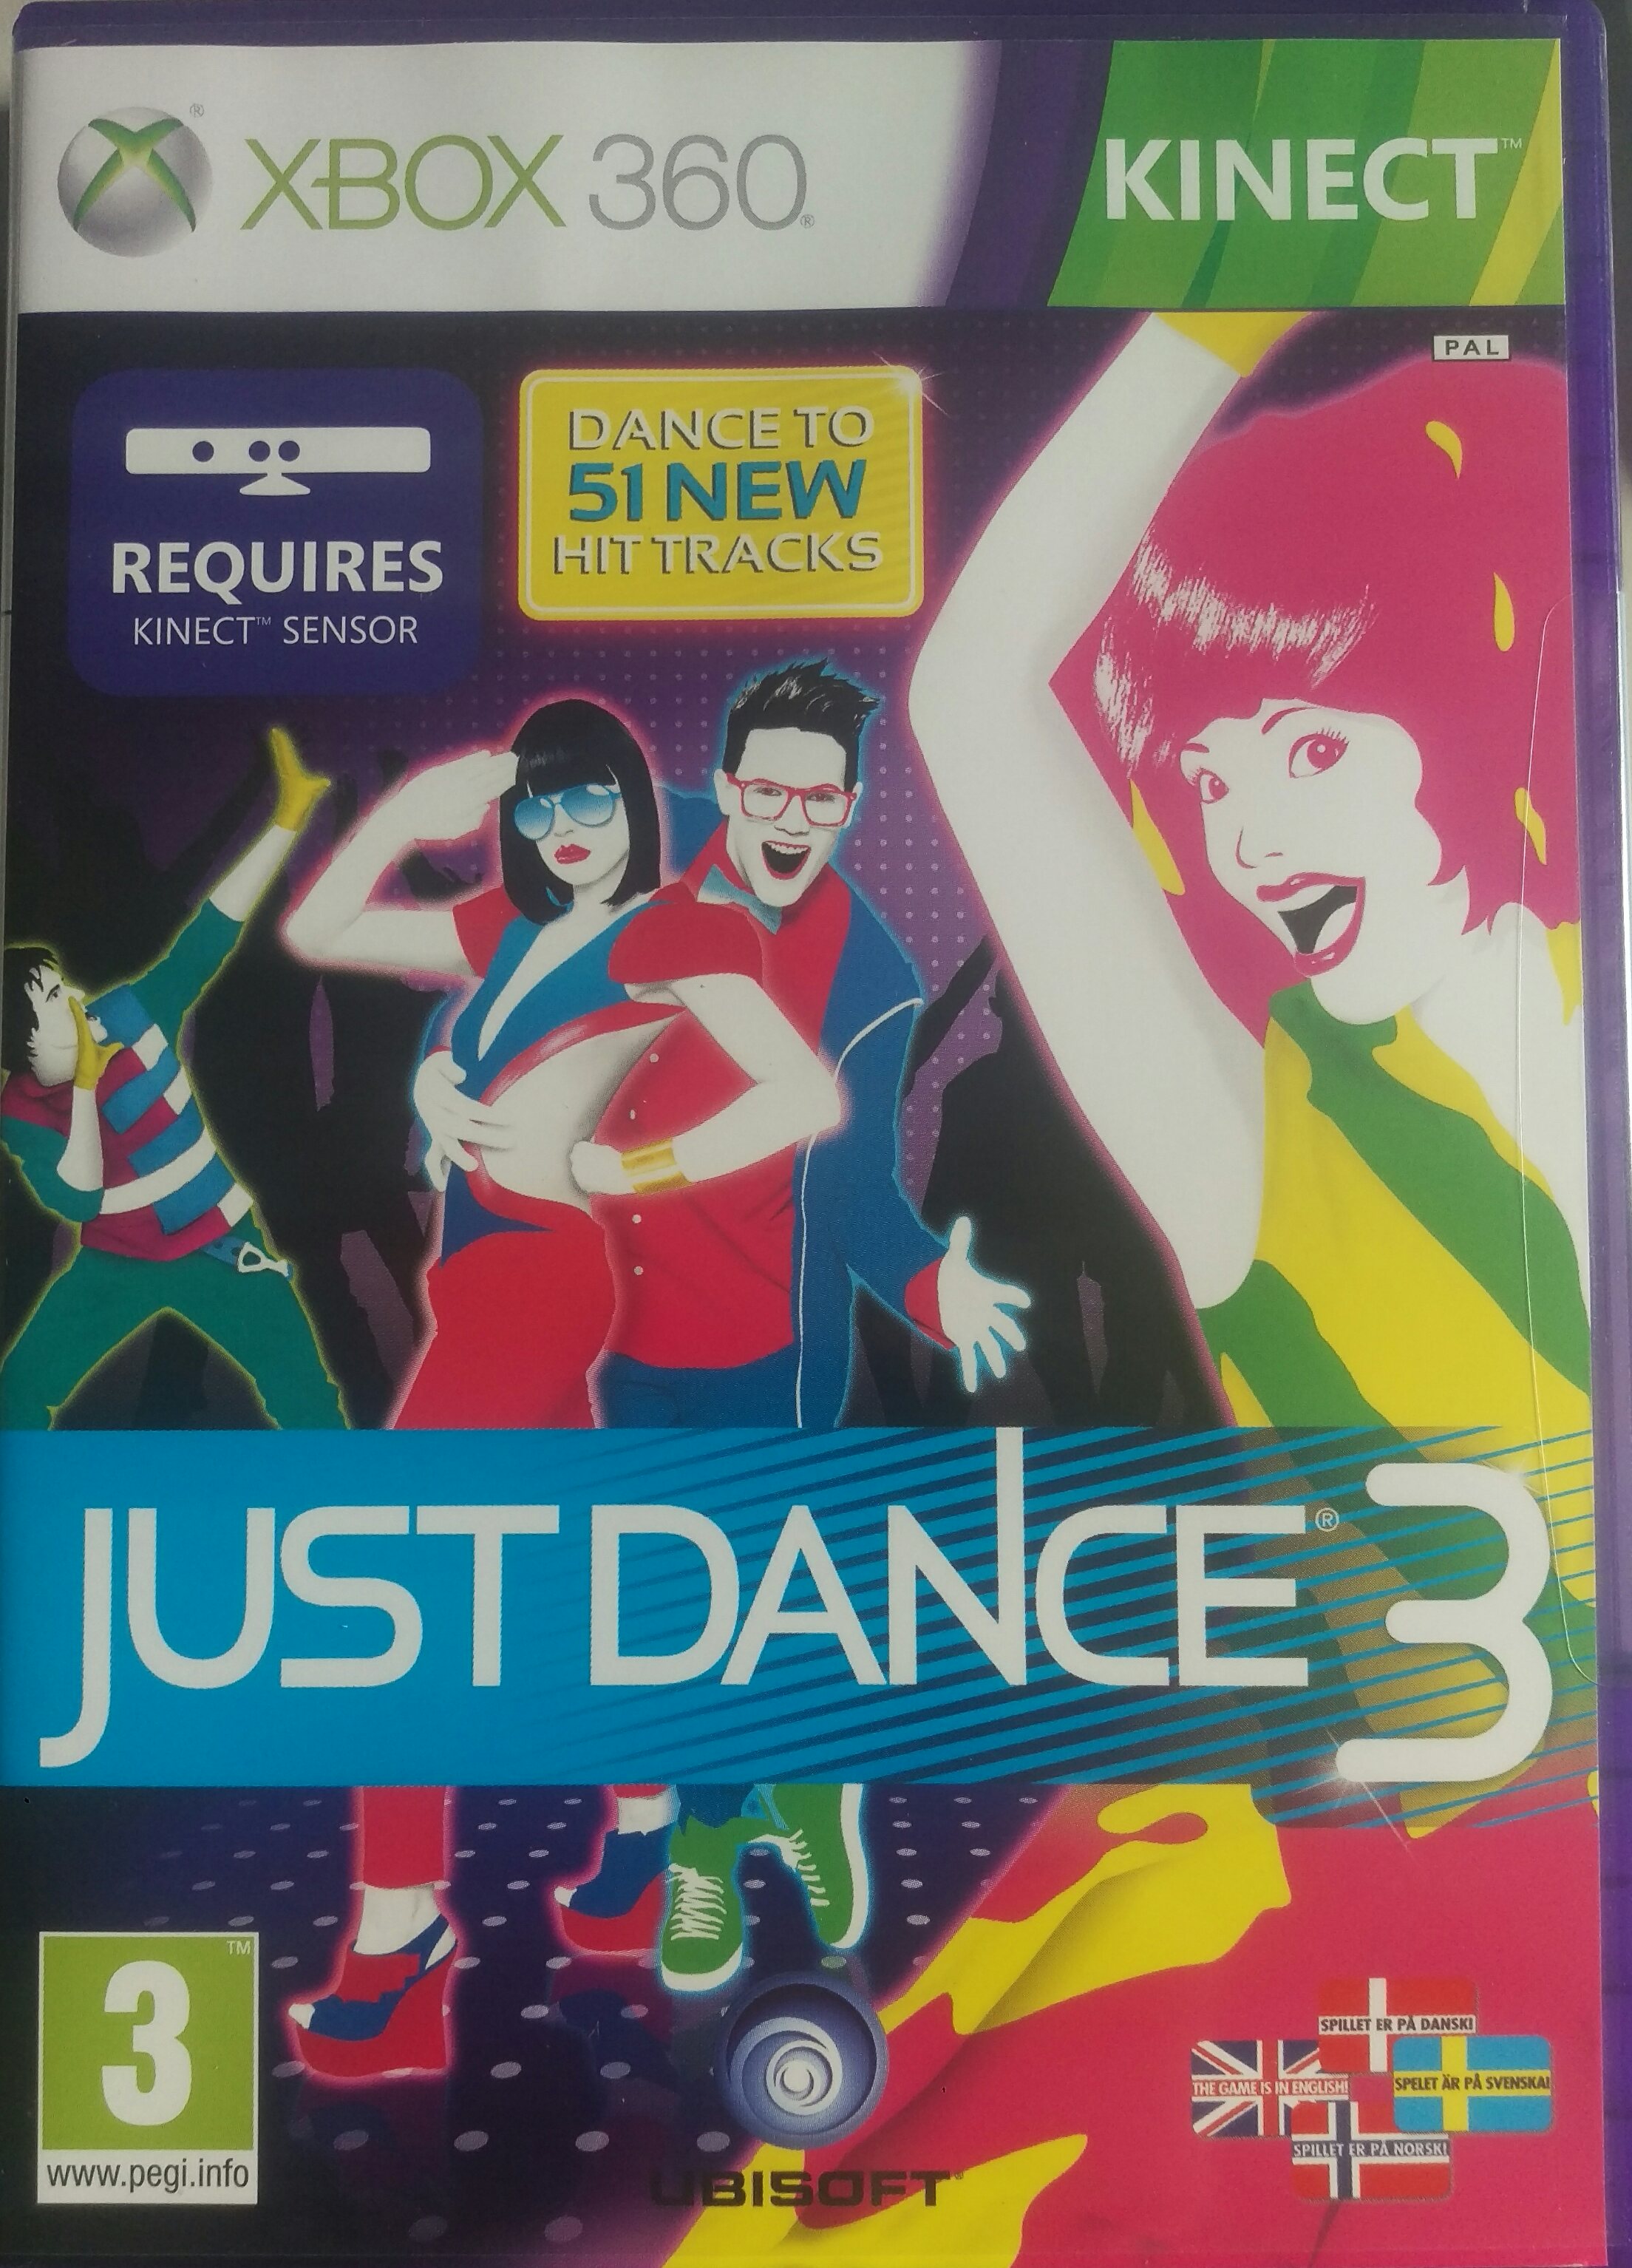 Just Dance 3 - Kinect Required (Xbox 360)